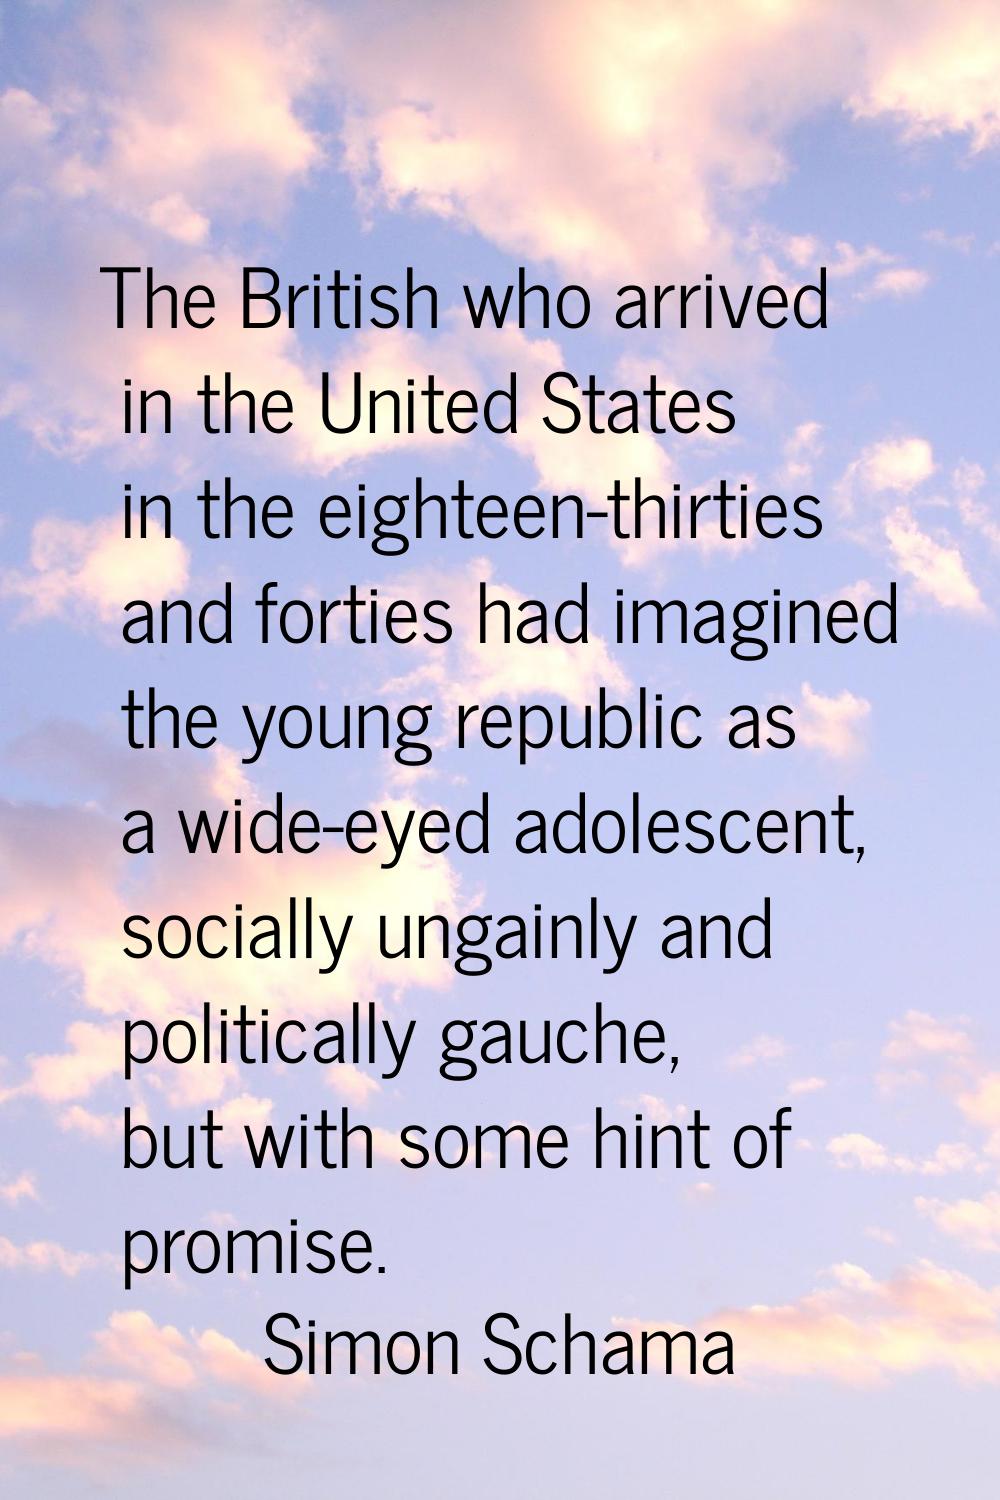 The British who arrived in the United States in the eighteen-thirties and forties had imagined the 